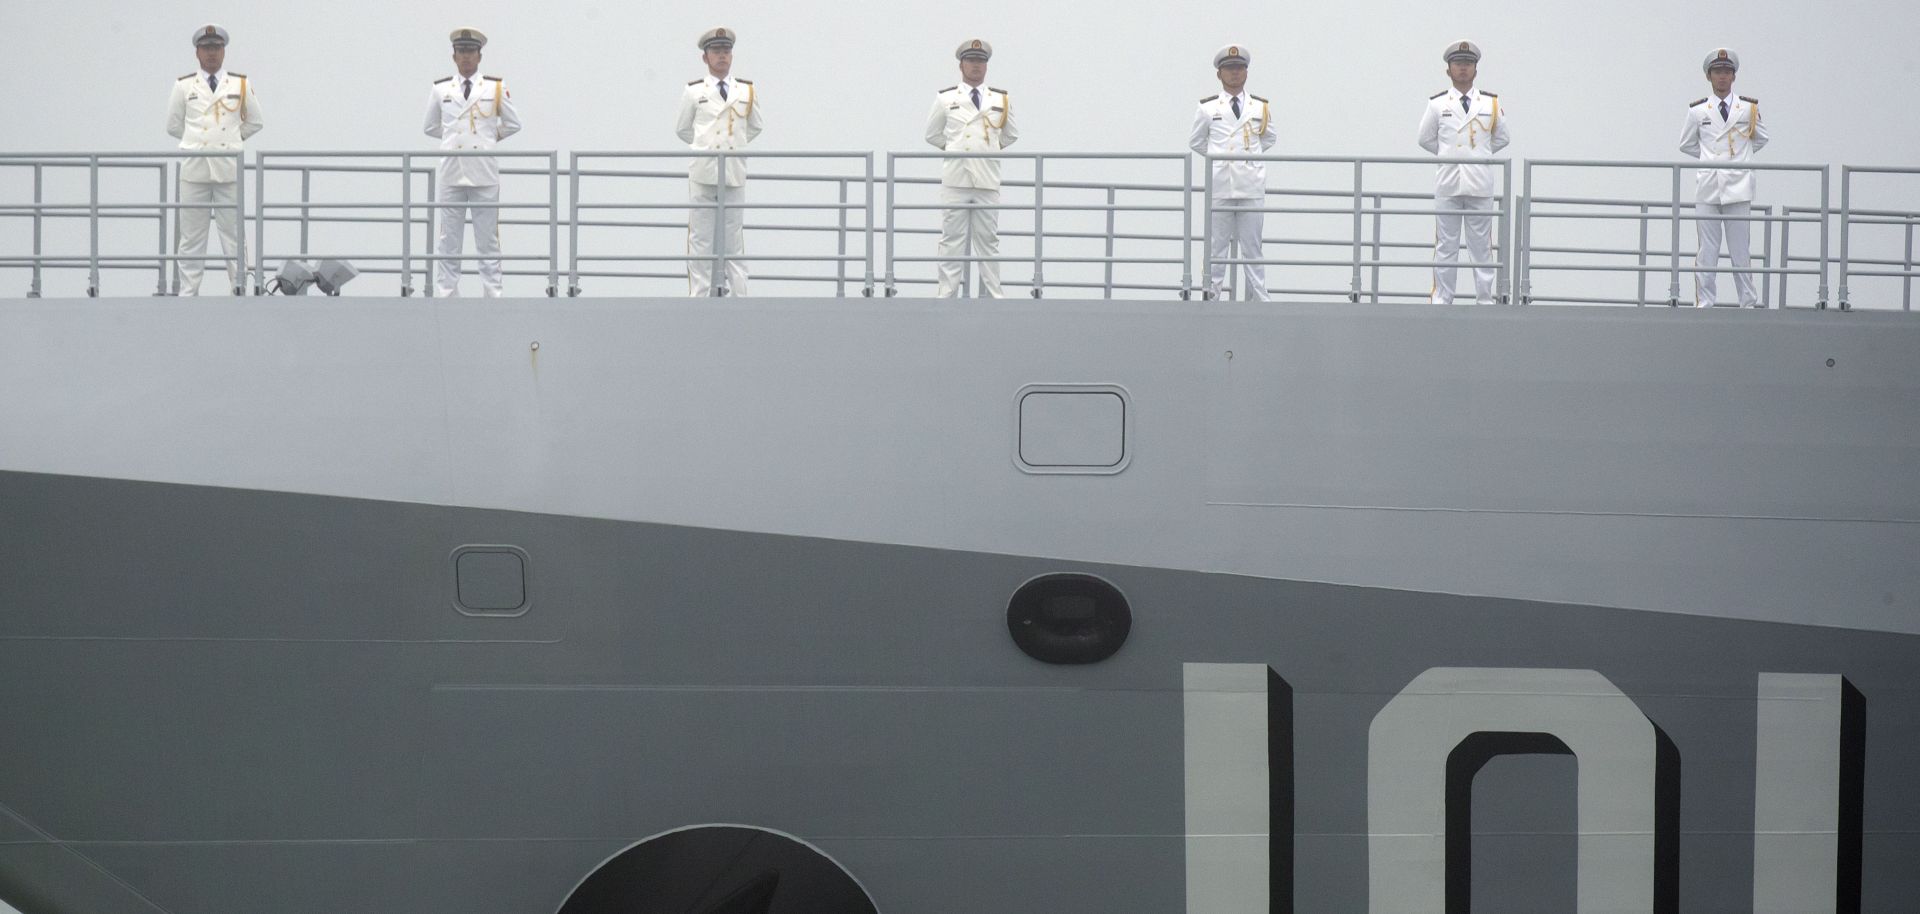 Sailors stand on the deck of the new type 055 guided missile destroyer Nanchang, belonging to the Chinese People's Liberation Army (PLA) Navy. China staged a naval parade on April 23 to commemorate the 70th anniversary of the founding of China's PLA Navy. 